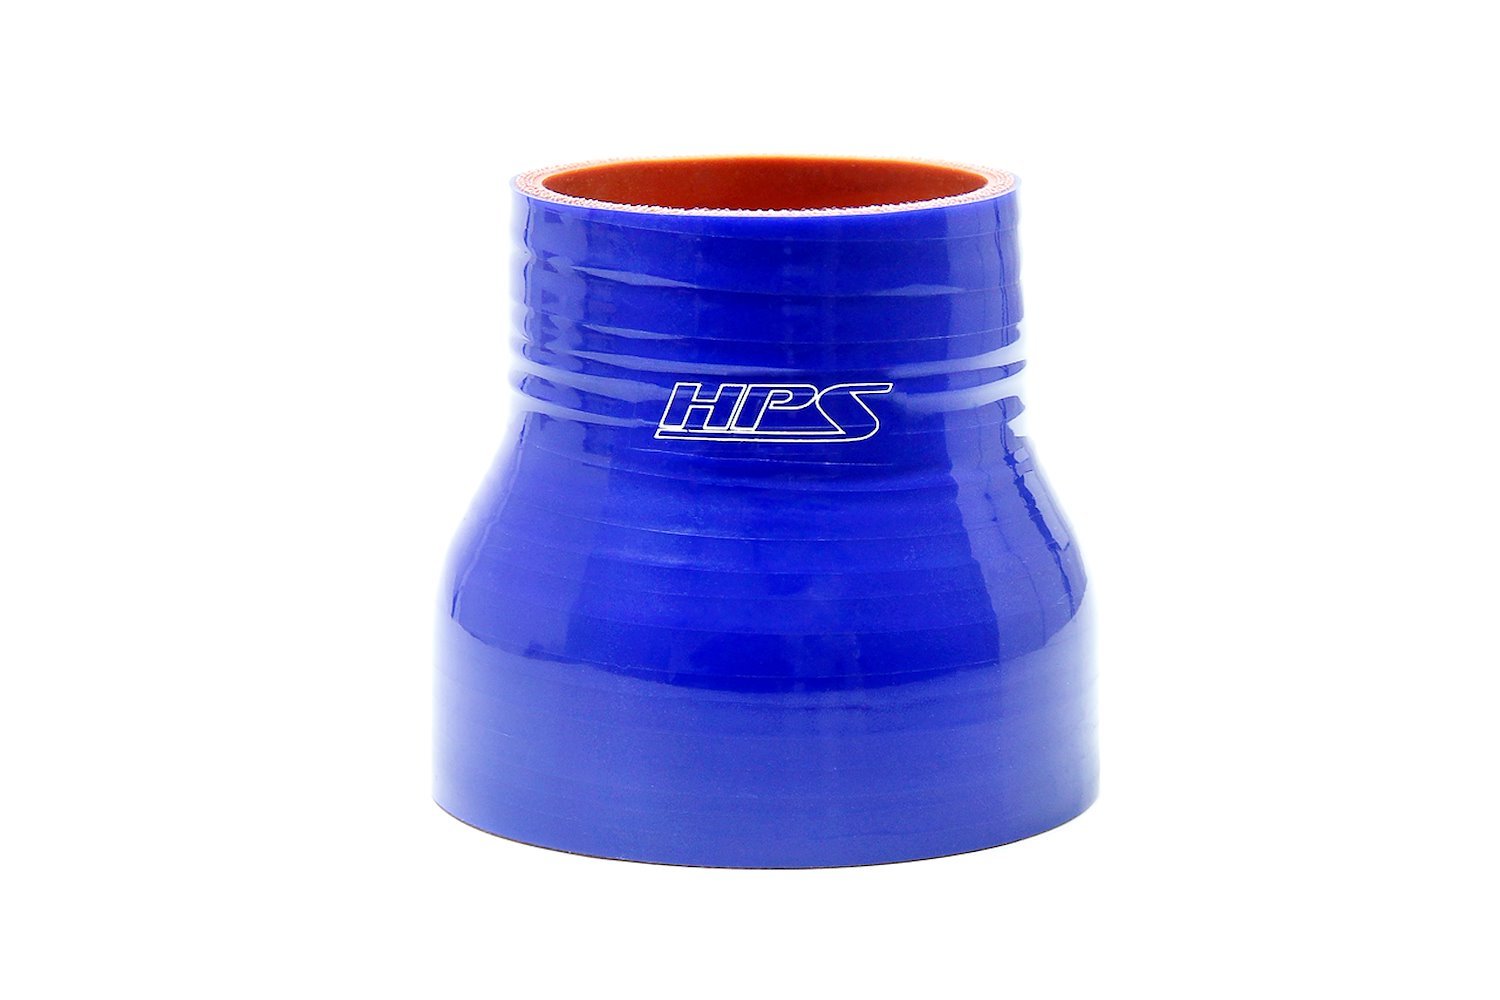 HTSR-212-250-BLUE Silicone Reducer Hose, High-Temp 4-Ply Reinforced, 2-1/8 in. - 2-1/2 in. ID, 3 in. Long, Blue